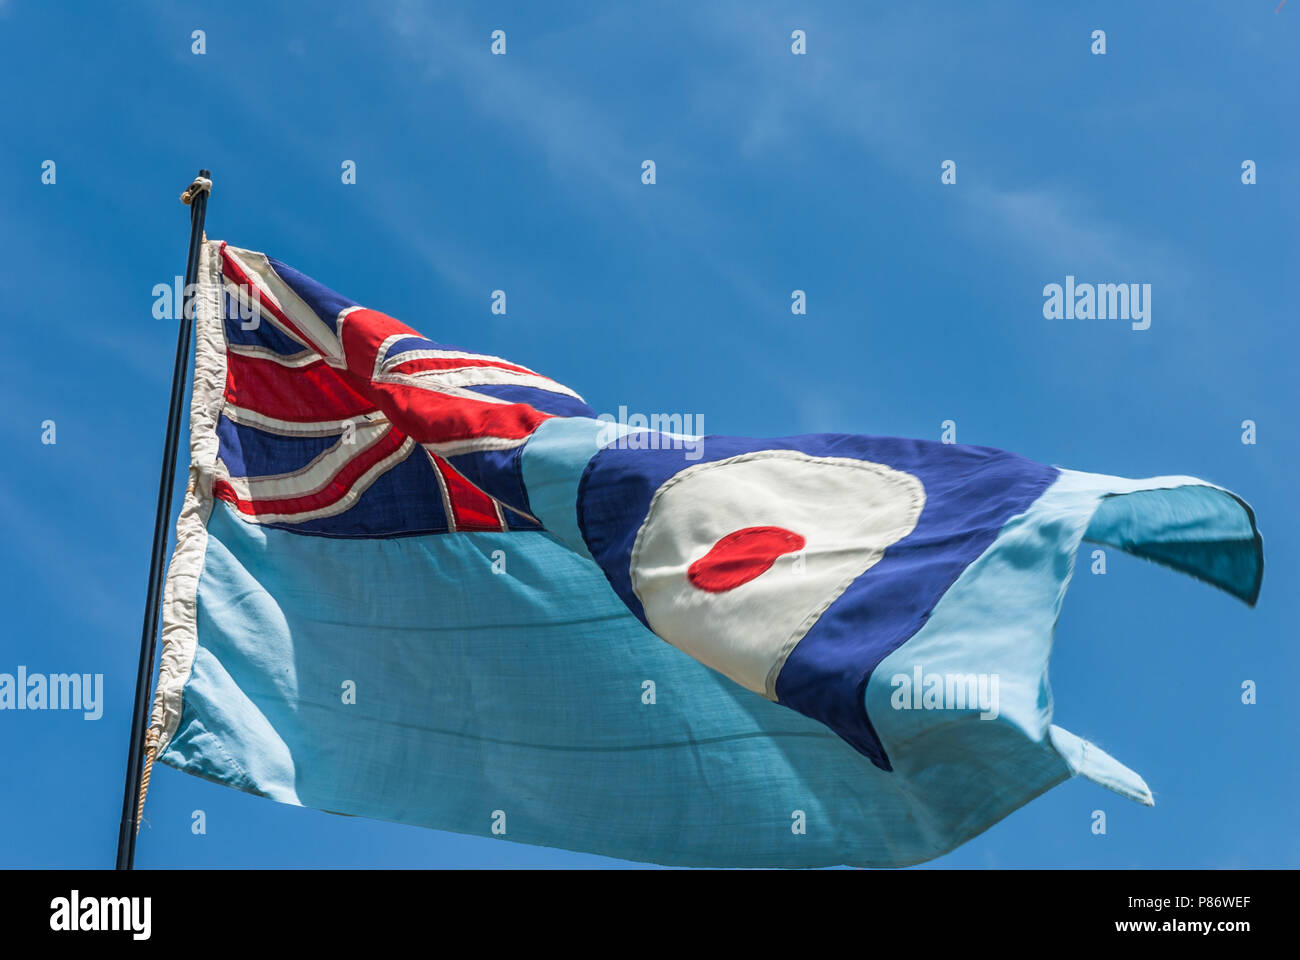 London, UK. 10th July, 2018. British RAF flying in the wind. it is the oldest independent air force in the world marking it's 100th year in 2018. Credit: Ian Hubball/Alamy Live News Stock Photo